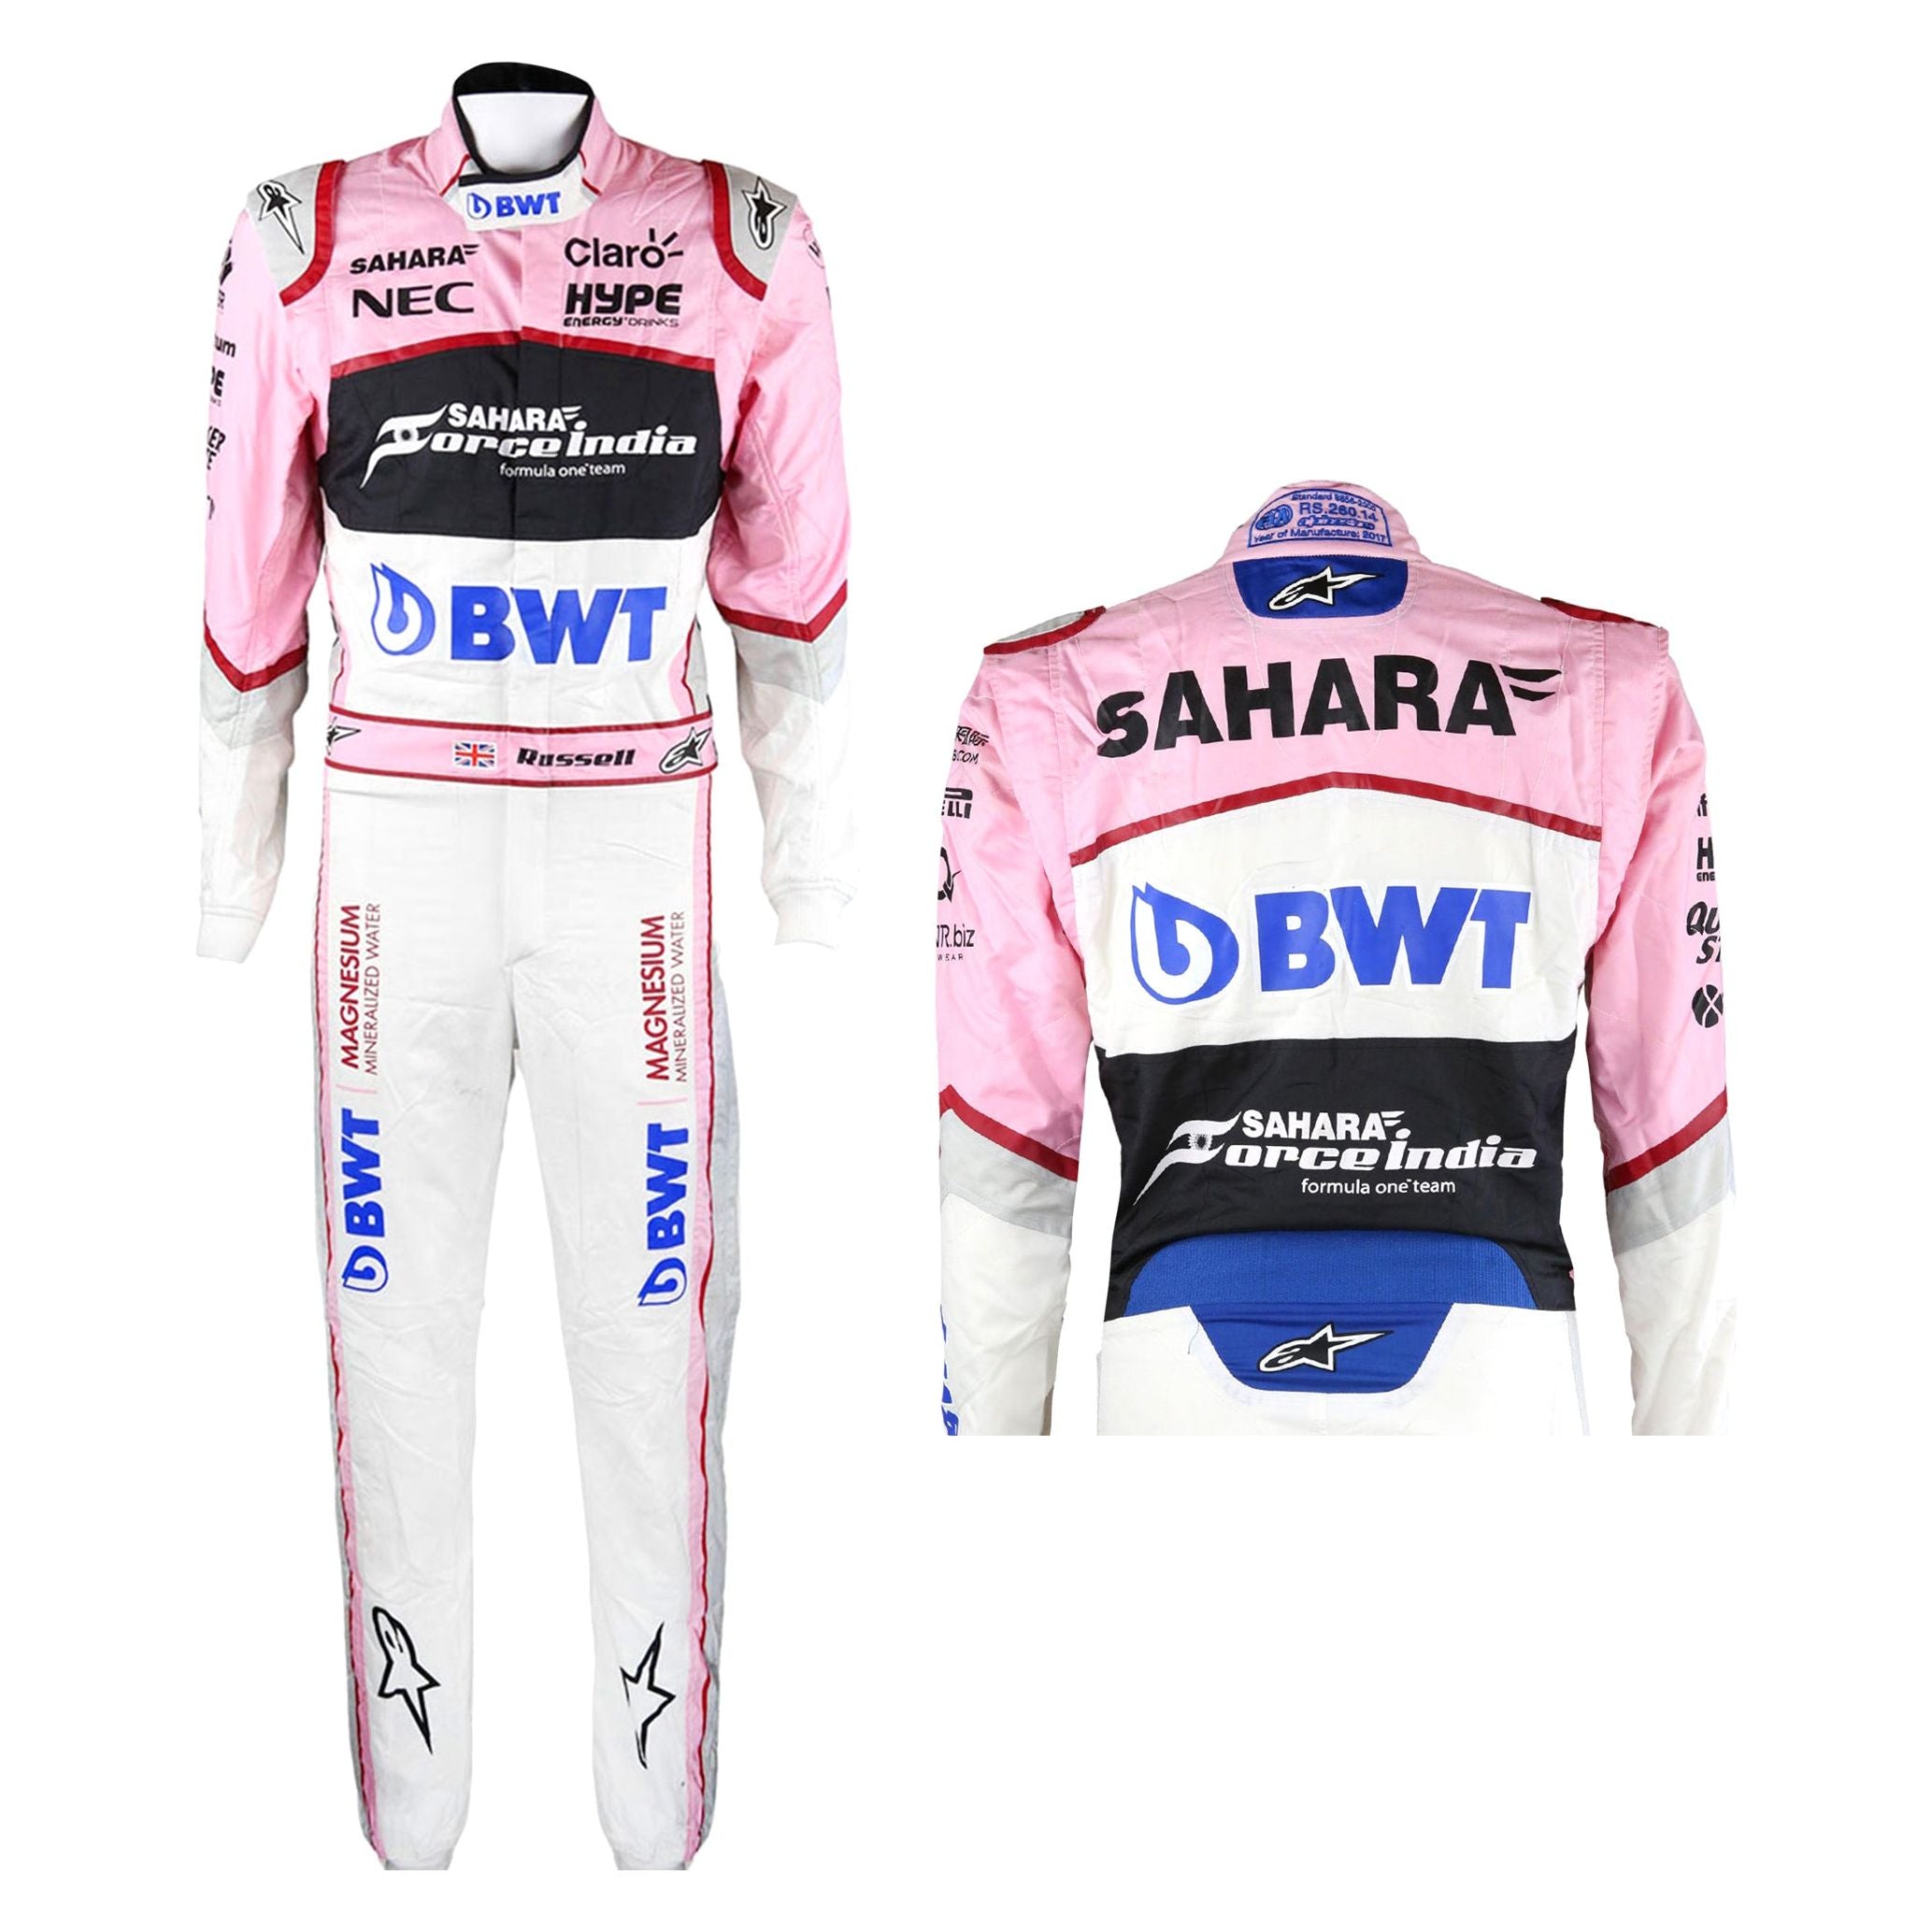 kart racing Sublimation Protective clothing Racing gear Suit N-0239